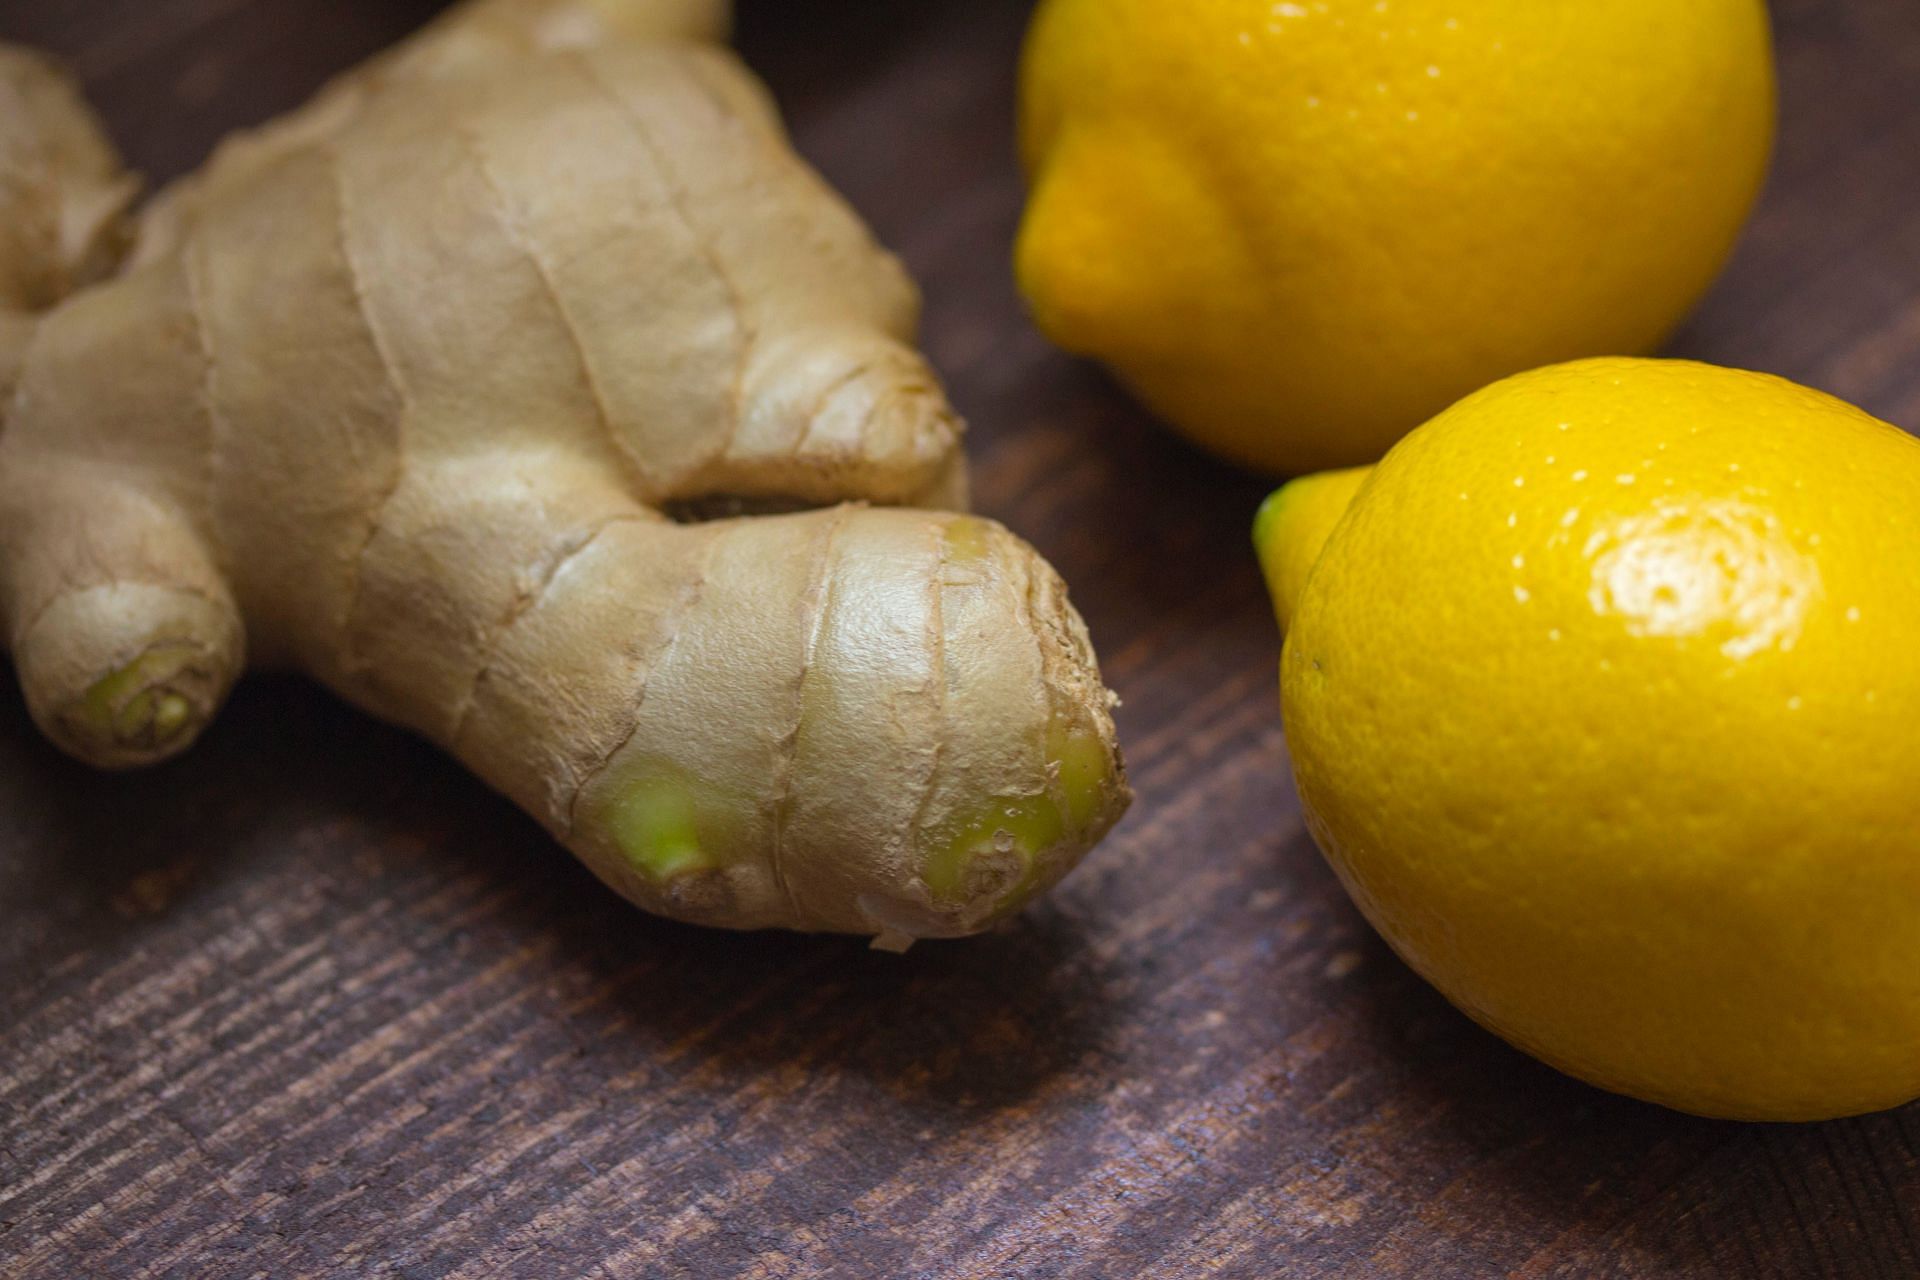 dry ginger vs fresh ginger benefits (image sourced via Pexels / Photo by angele)